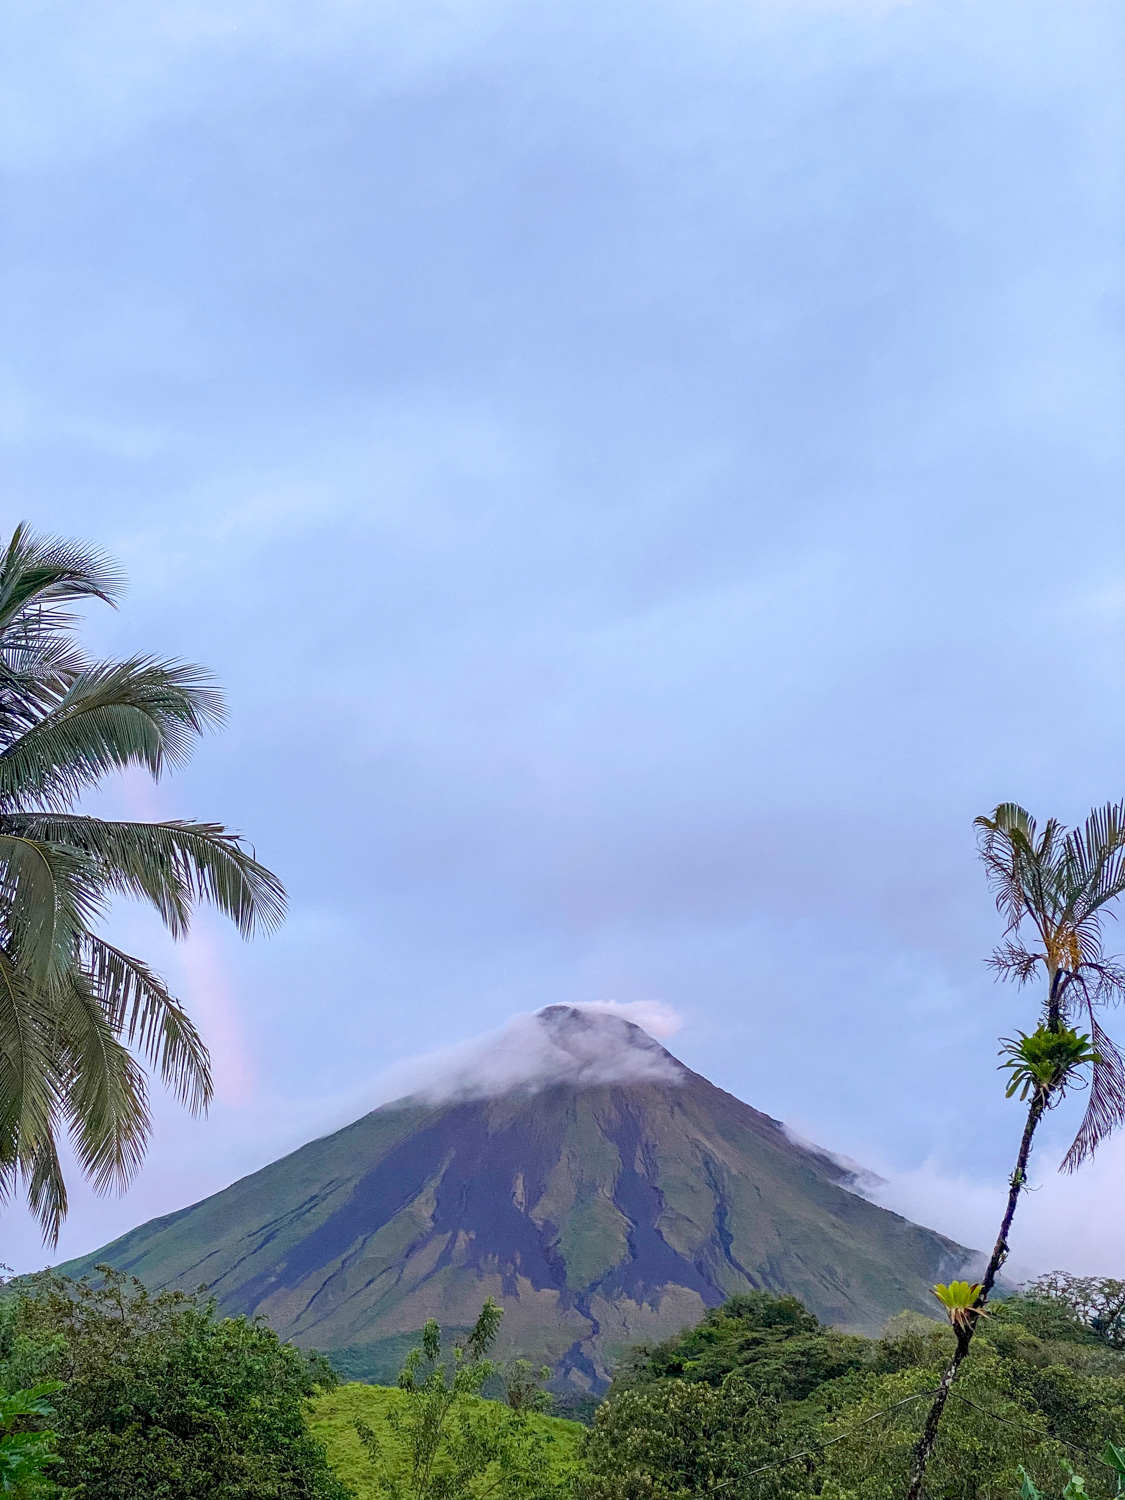 Visiting the Arenal Volcano is one of the best things to do in Costa Rica